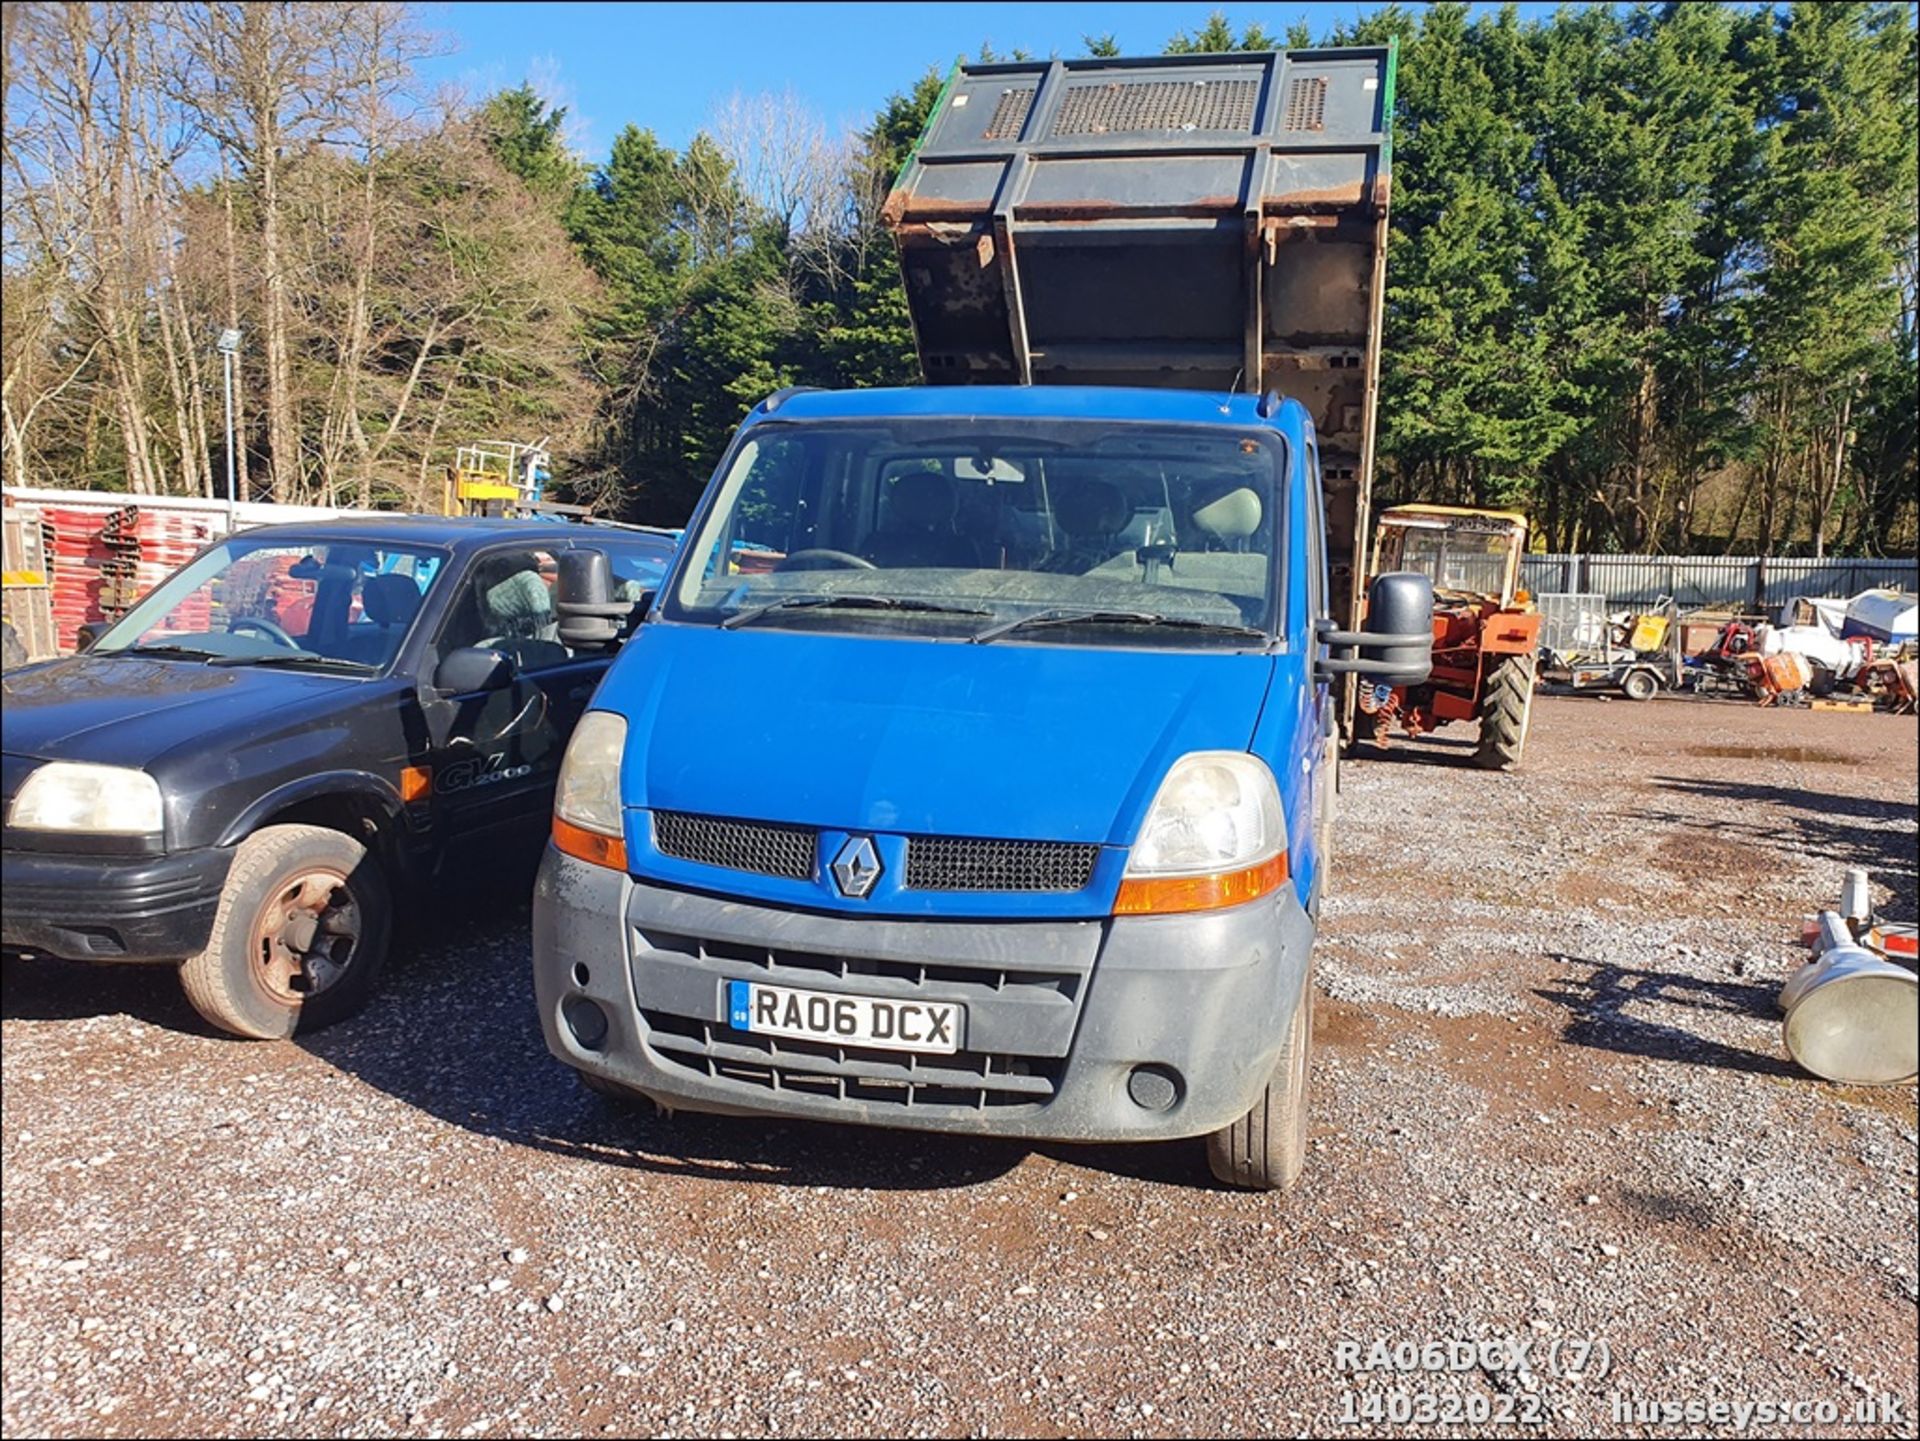 06/06 RENAULT MASTER CCML35 DCI 120 MWB - 2463cc 2dr Tipper (Grey) - Image 7 of 22